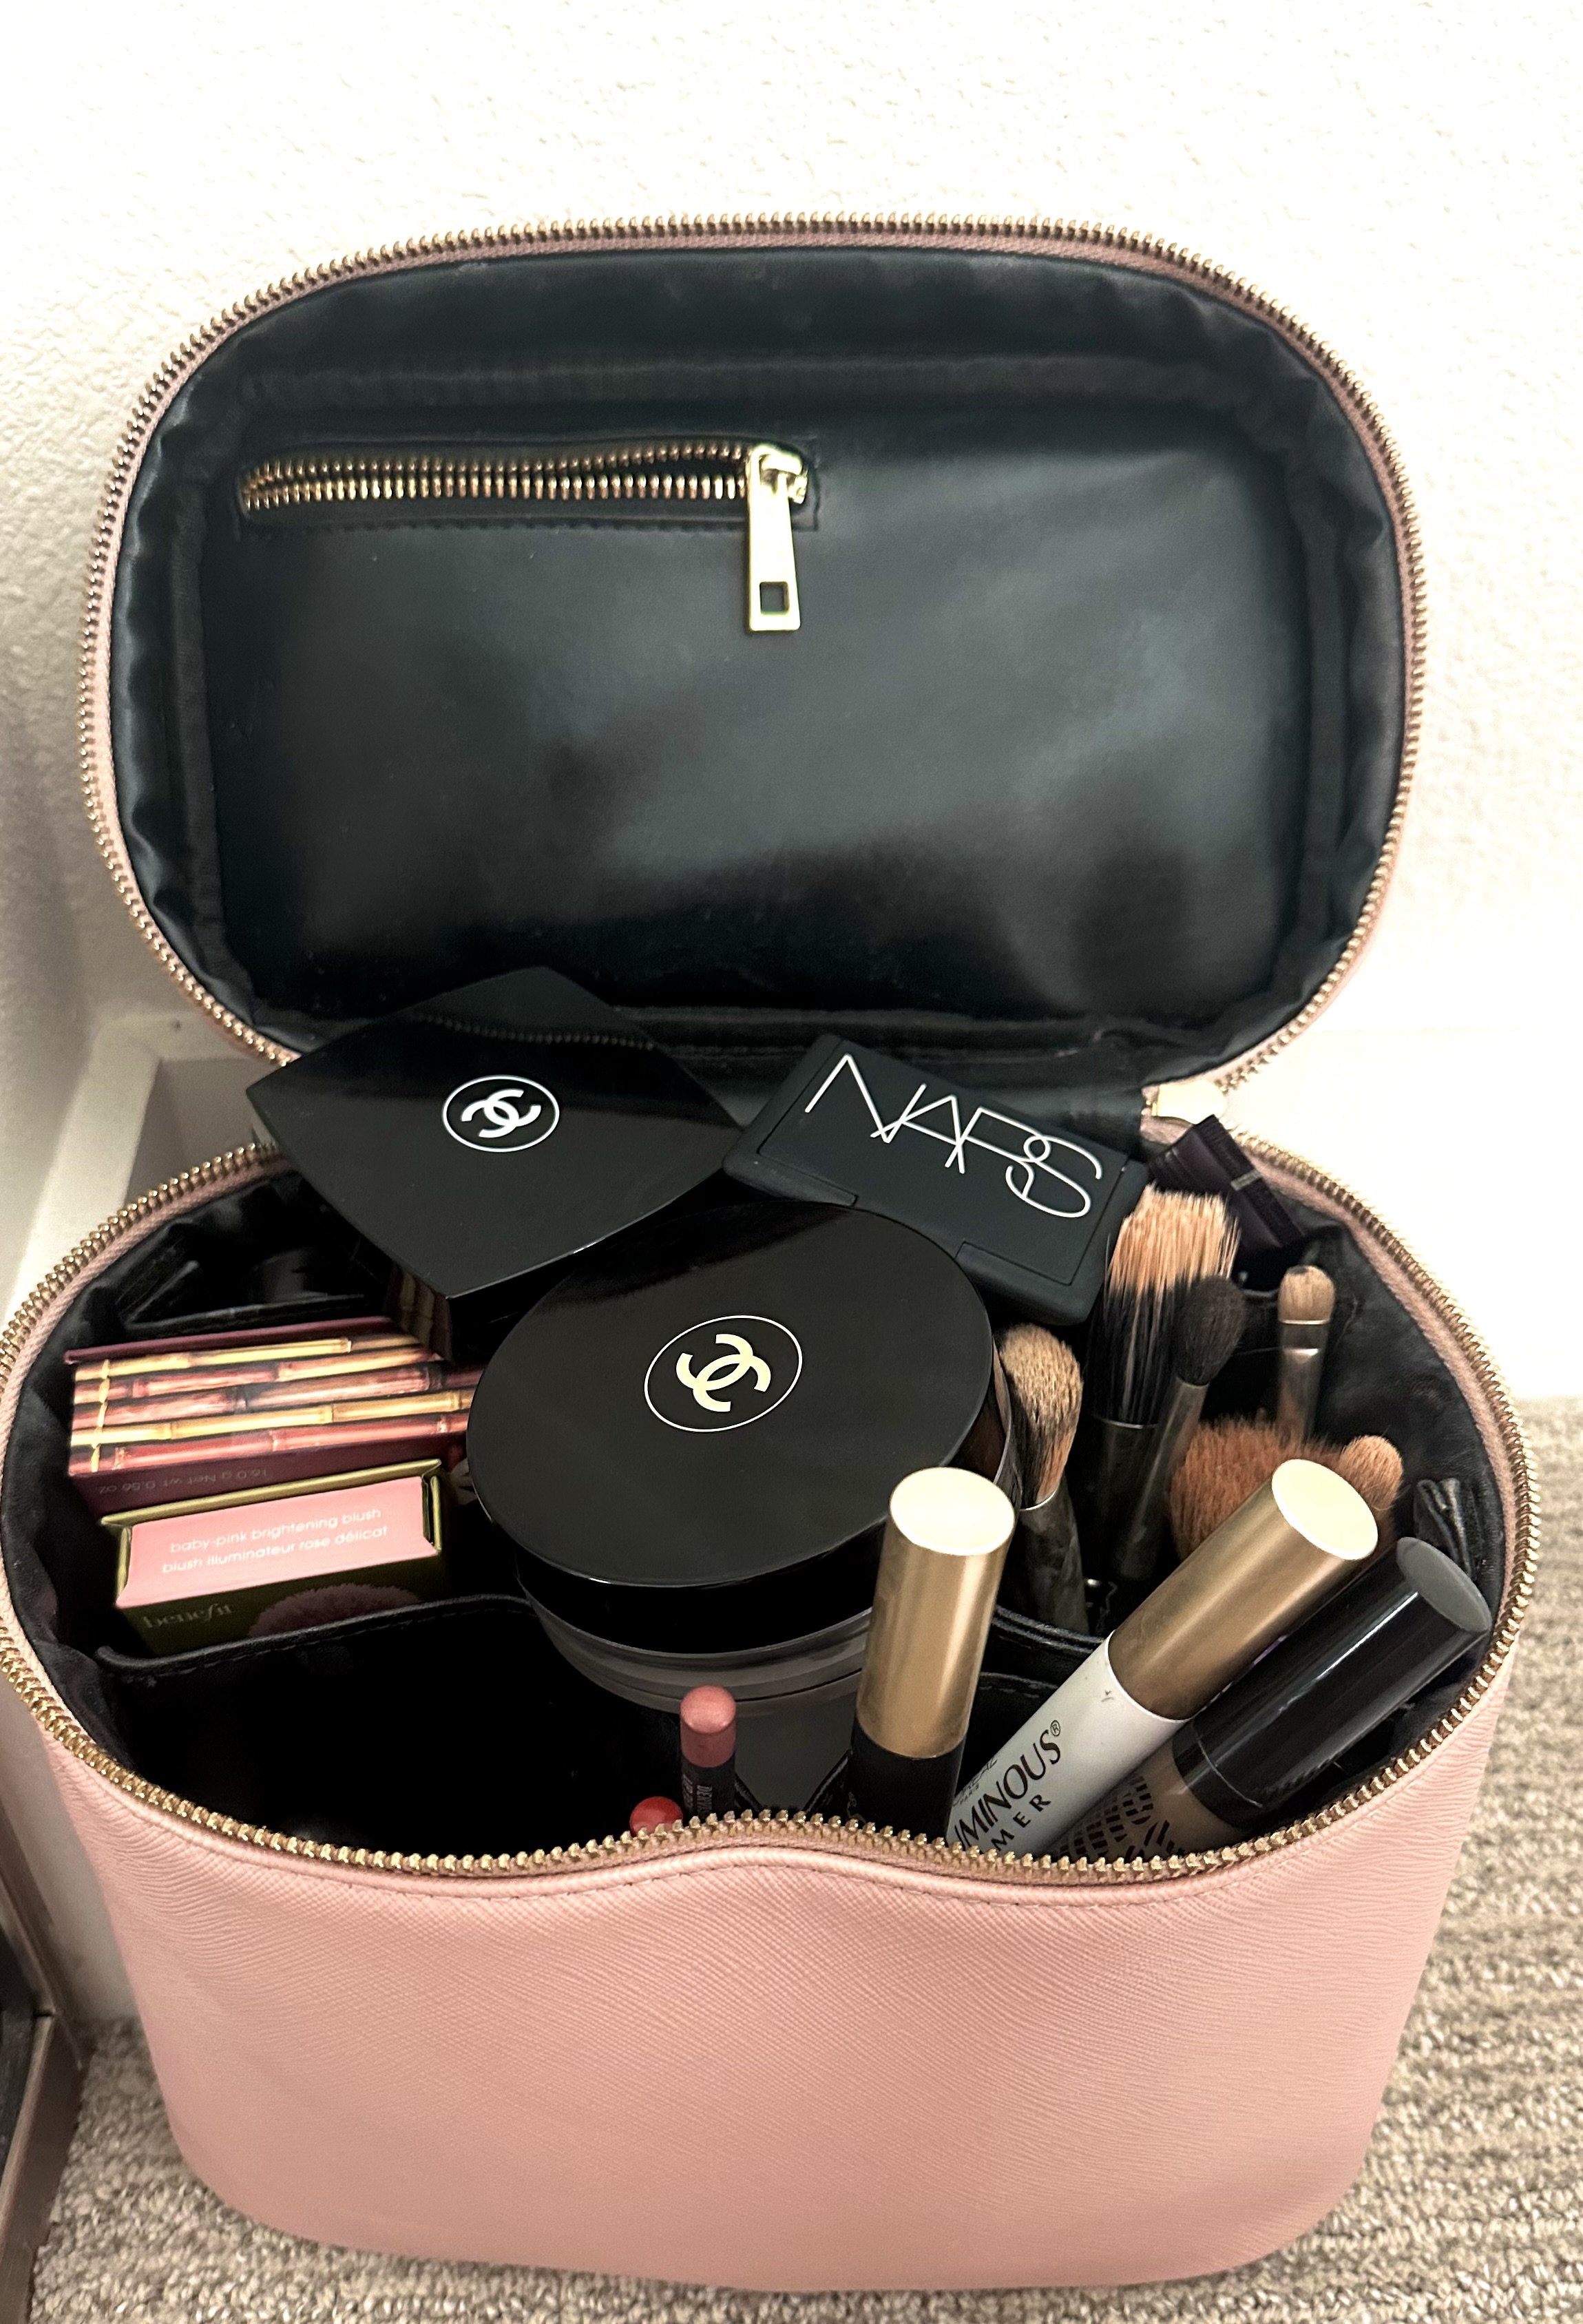 NARS Cosmetics - Find your makeup bag must-haves at Fenwick Bond Street  today and take away a NARS cosmetic bag with any 3 products purchased!  Pencil in your appointment today, call: 0207 493 4349 | Facebook